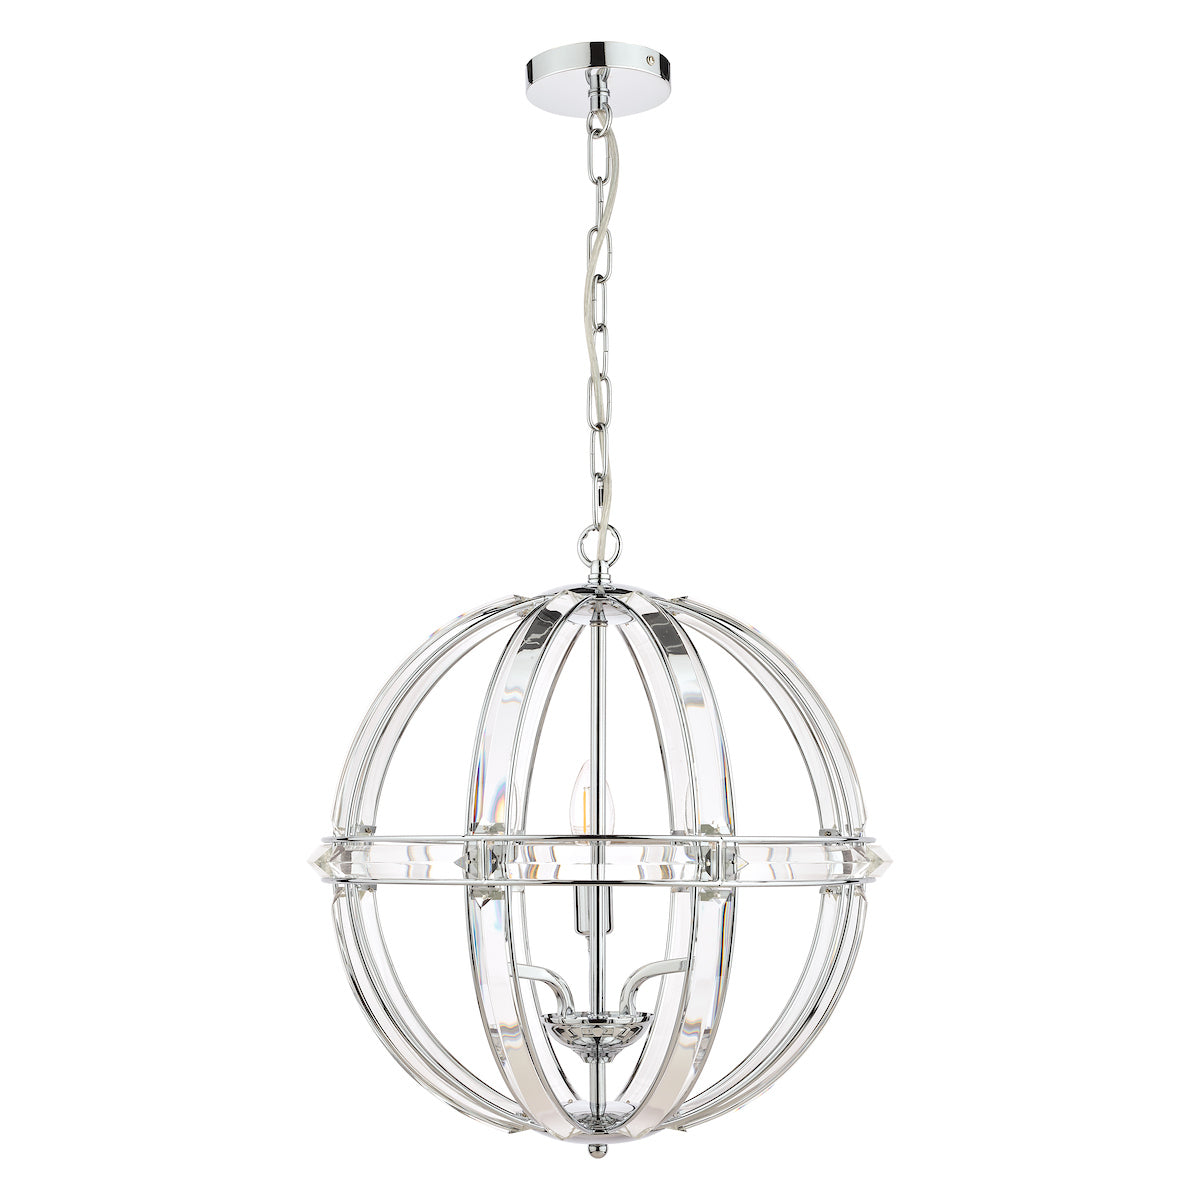 The Aidan light from Laura Ashley is finished with polished chrome metalwork and it is shaped like a globe with the frame housing curved glass sections which catch the light and a curved glass frame in a belt around the middle of the globe, the globe is suspended on a chrome chain from a flat 4 inch ceiling rose there are 5 bulbs inside the fitting which are easily reached in between the frame sections. There is a smaller version and a matching table lamp